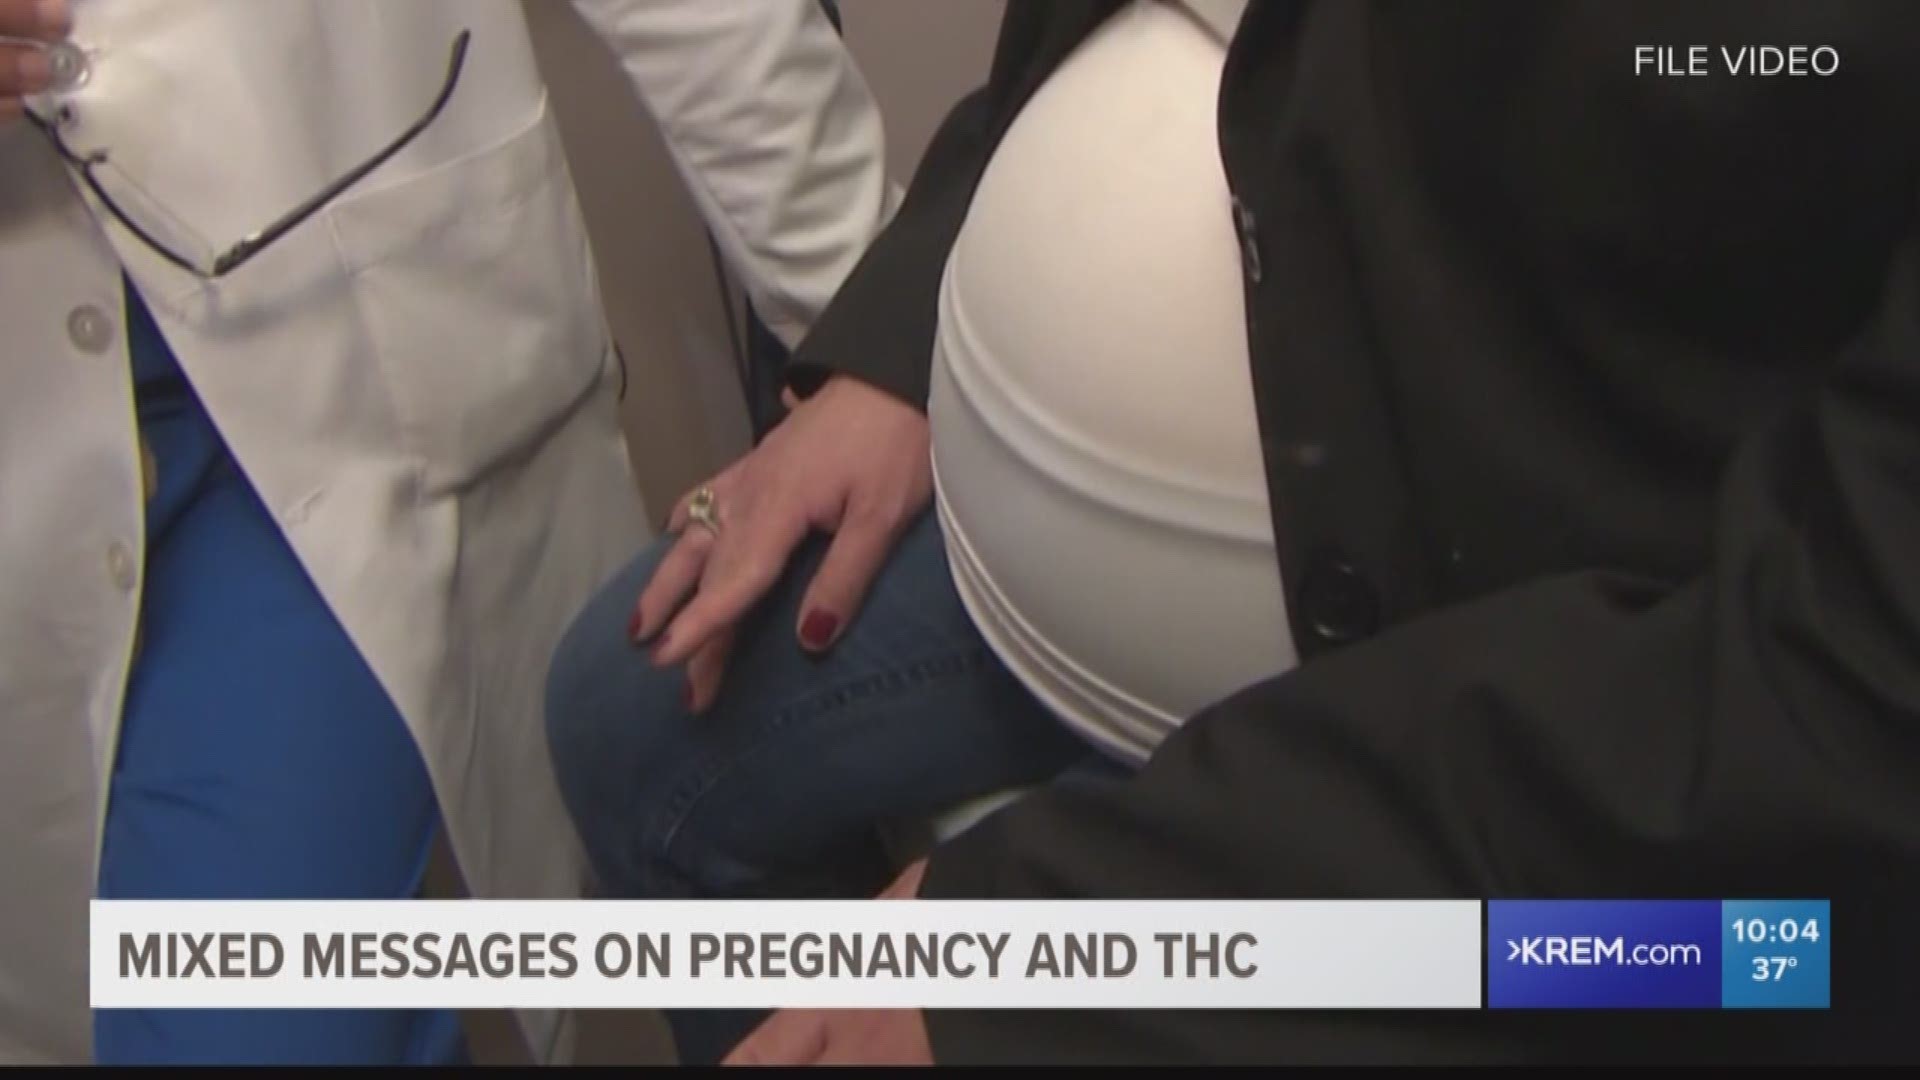 Researchers at WSU Spokane interviewed pregnant women, who told them they had found little information and mixed messages on its effects.